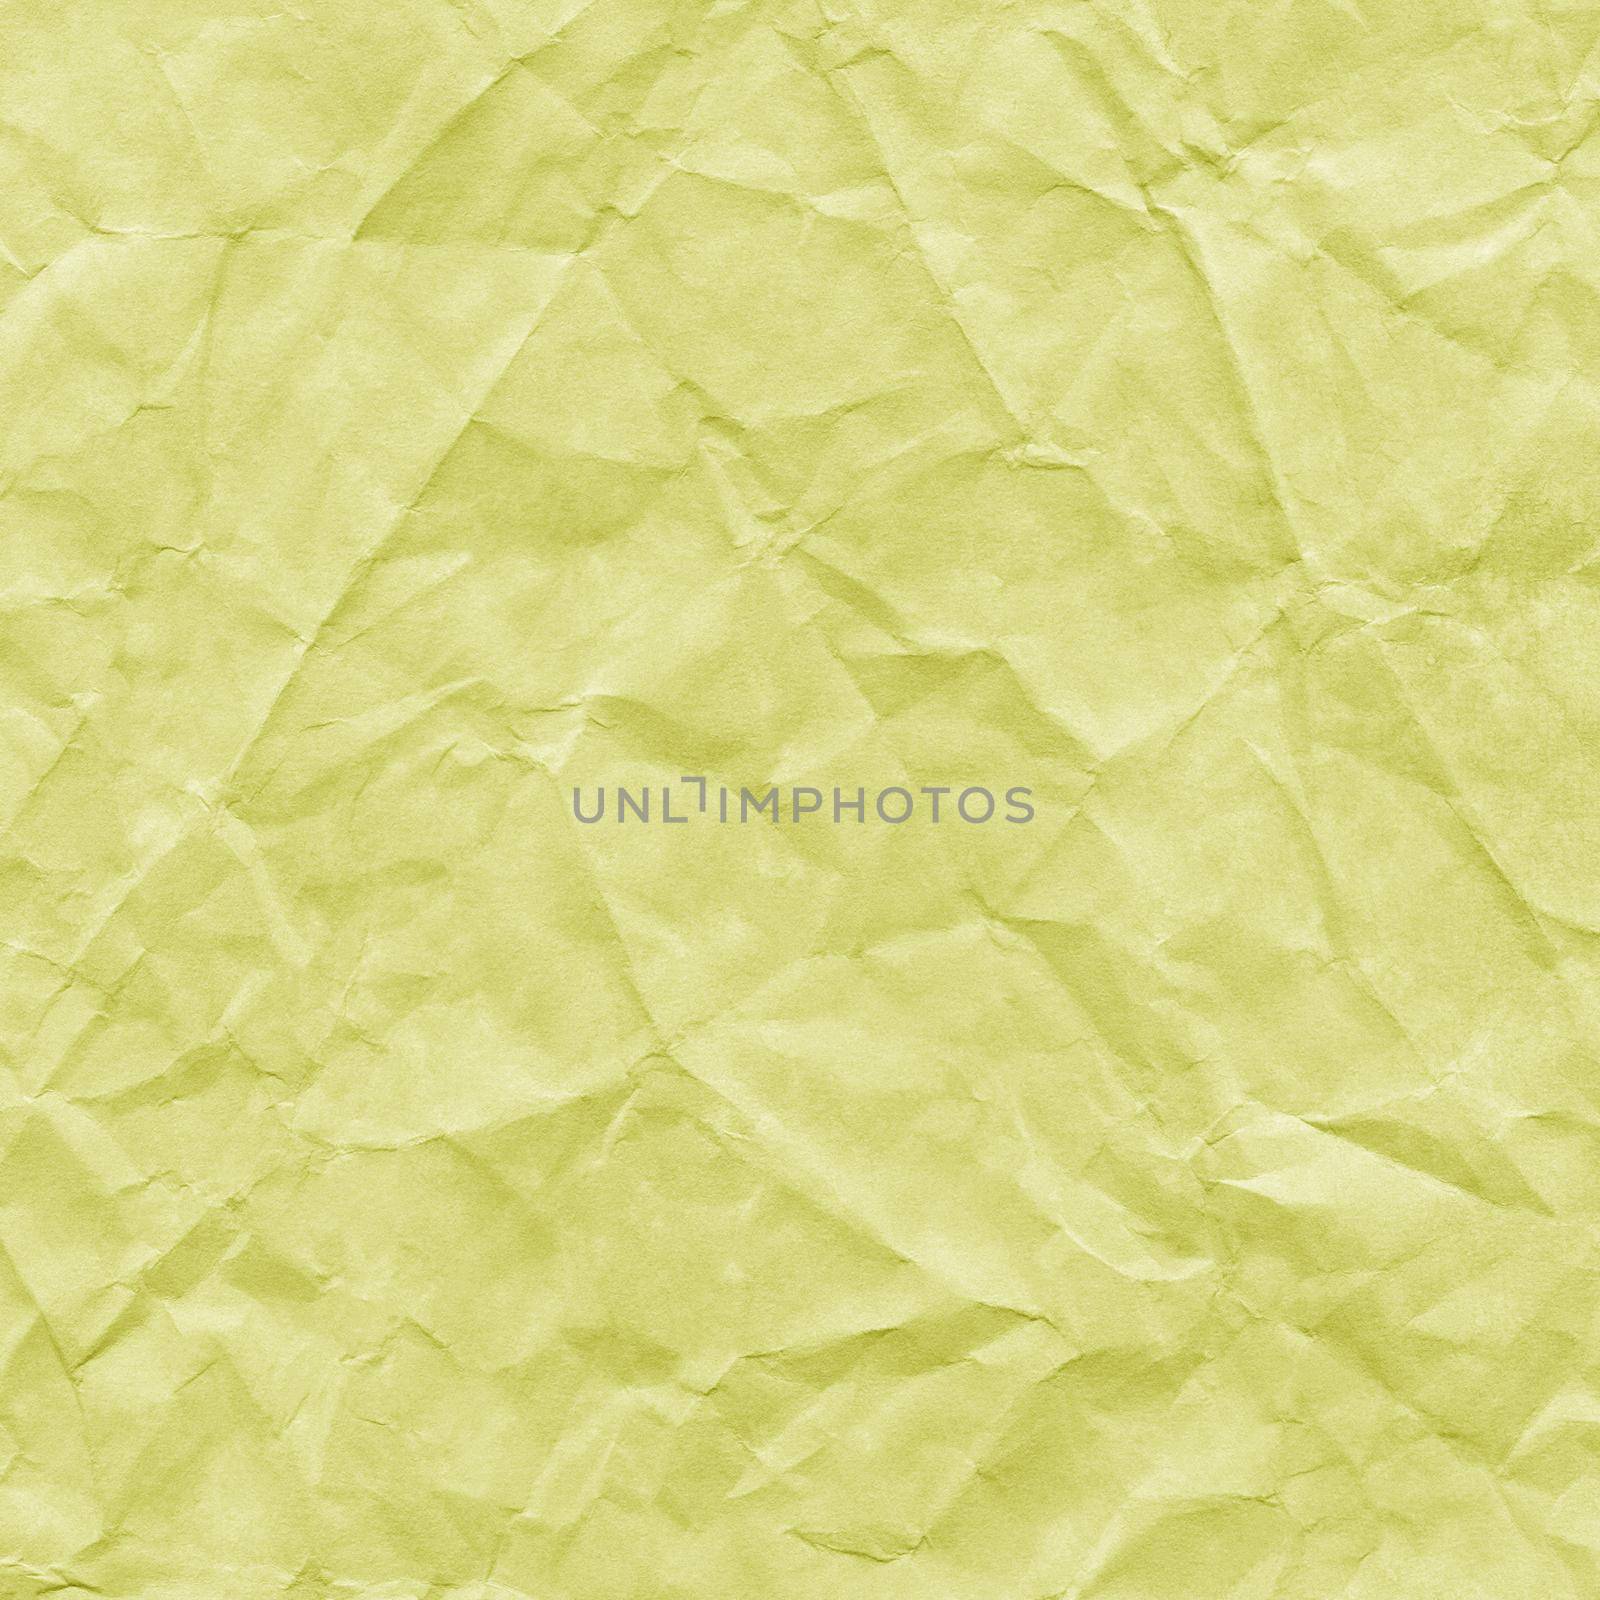 Abstract Yellow Watercolor Background. Yellow Watercolor Texture. Abstract Watercolor Hand Painted Background. Old Yellow Digital Paper. Vintage textured grunge background.